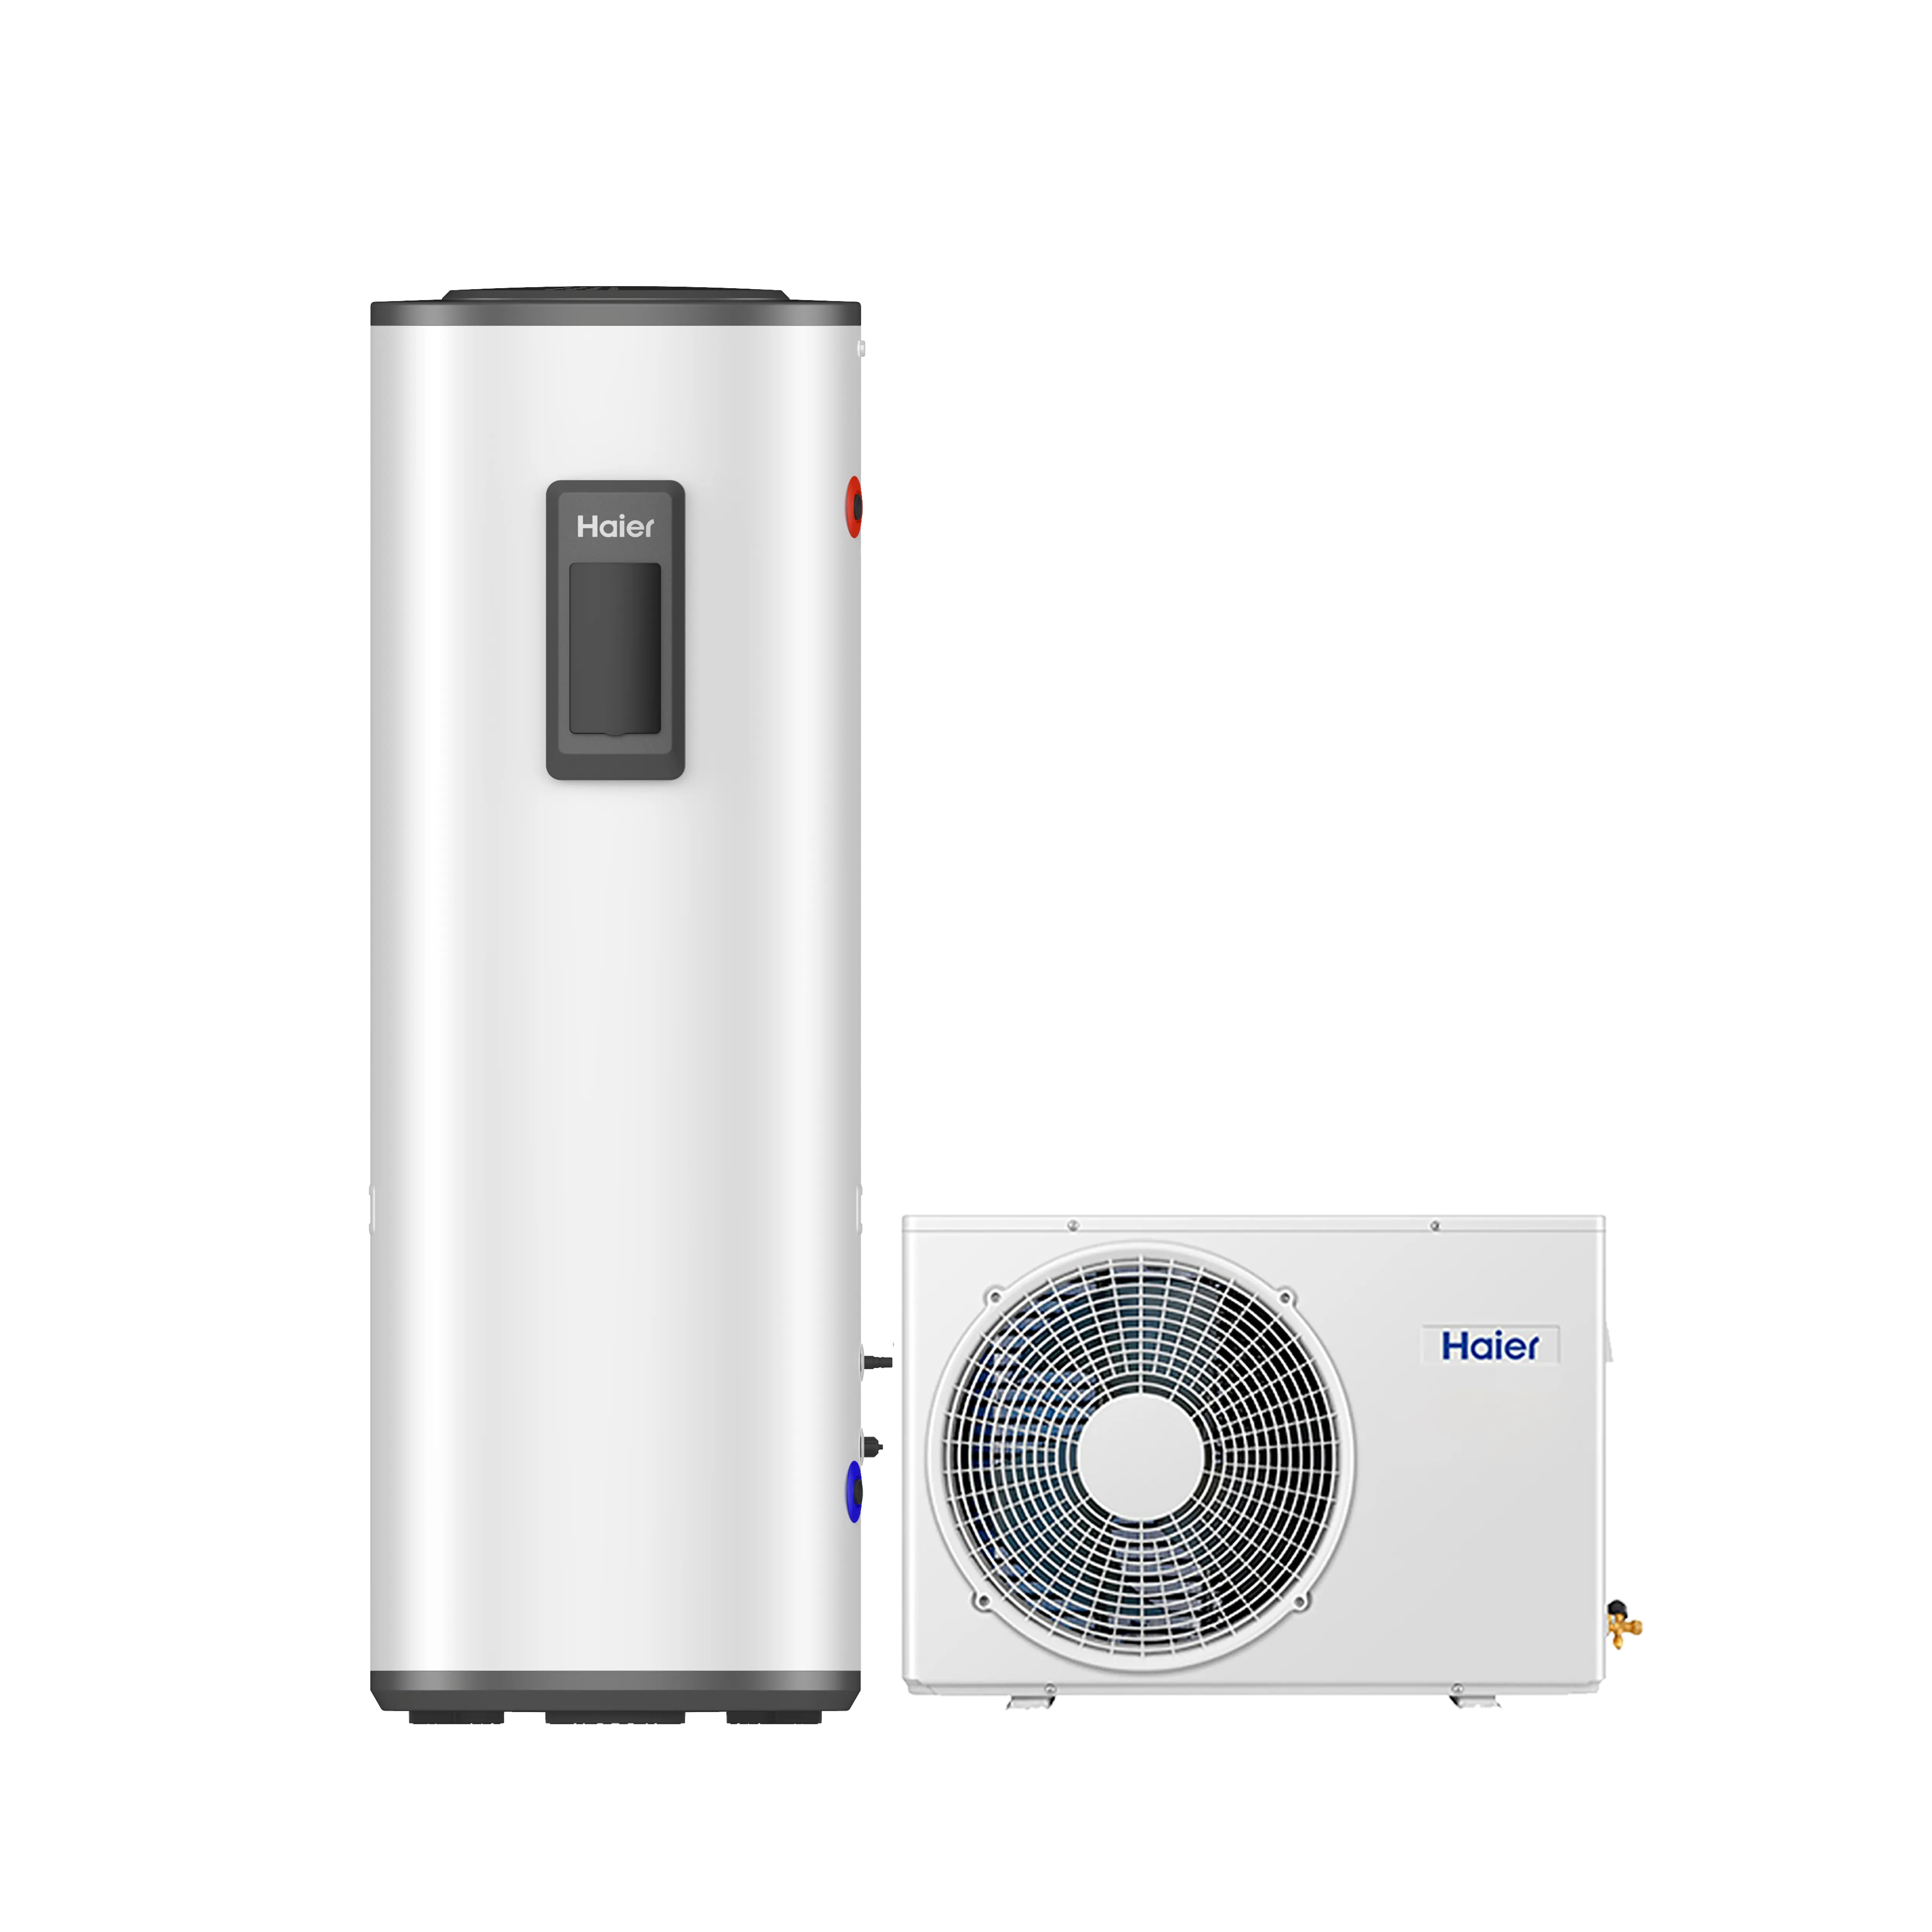 Haier Heat pump Air Source Multi-energy Connected High Efficiency R32 Domestic Heating Cooling Hvac Unit